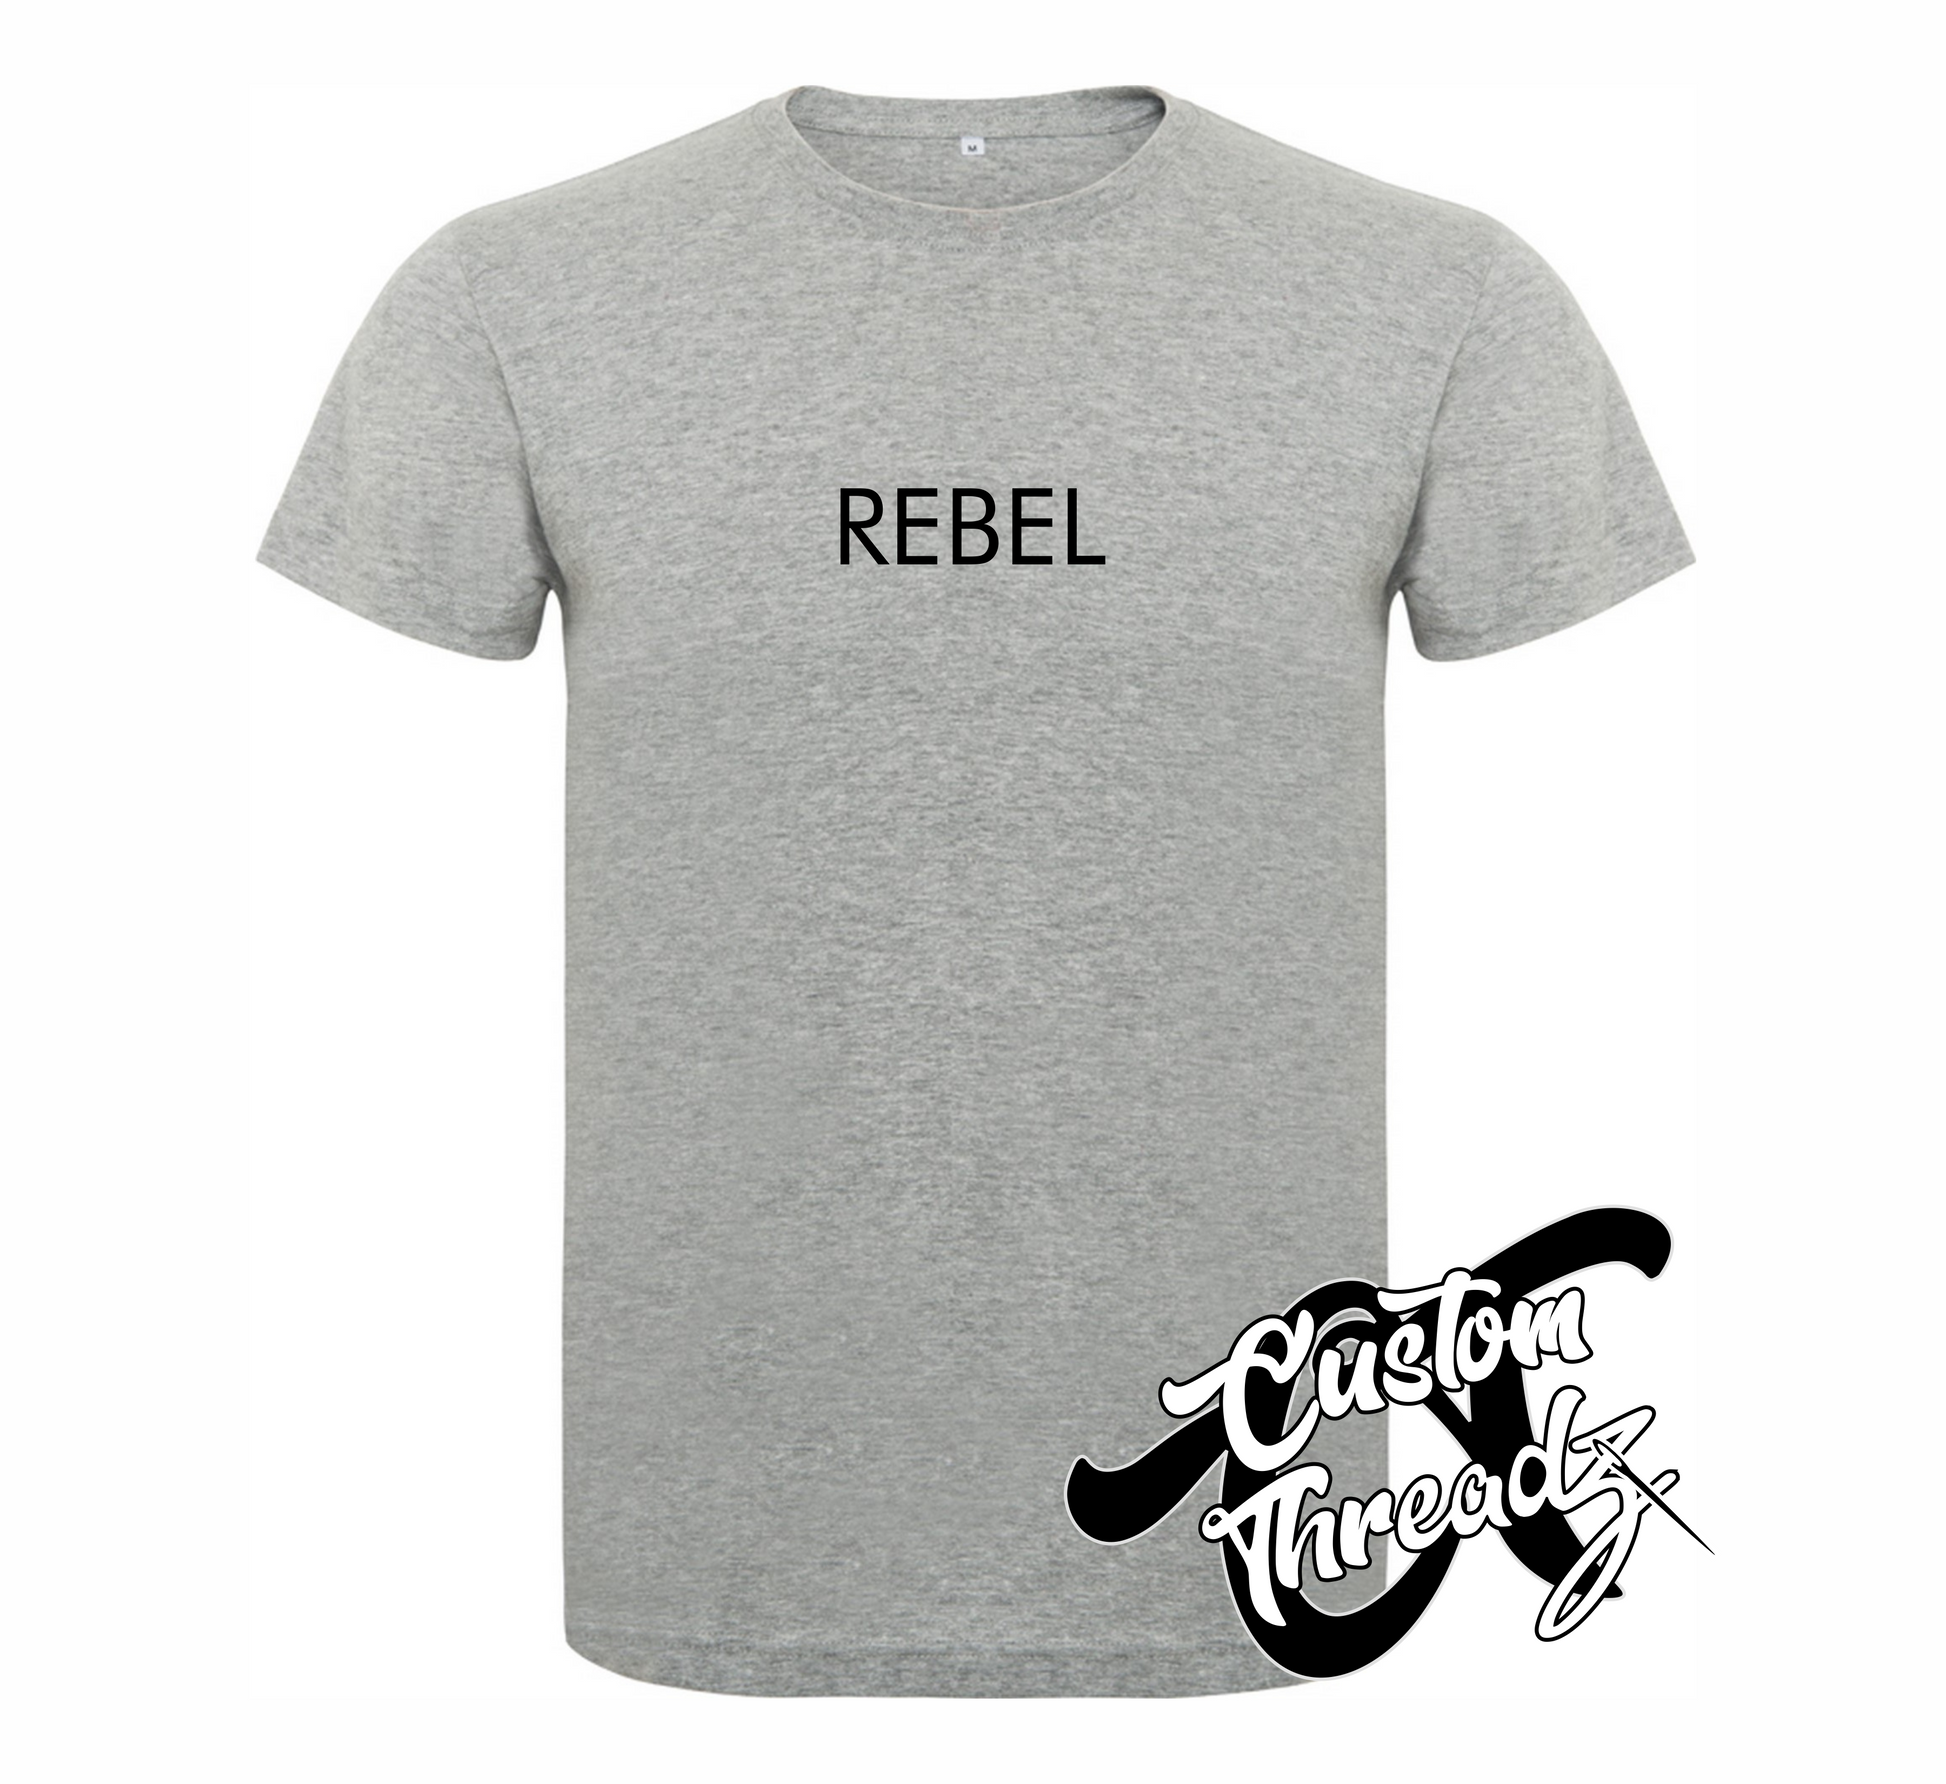 athletic heather grey tee with rebel the infamous collection DTG printed design